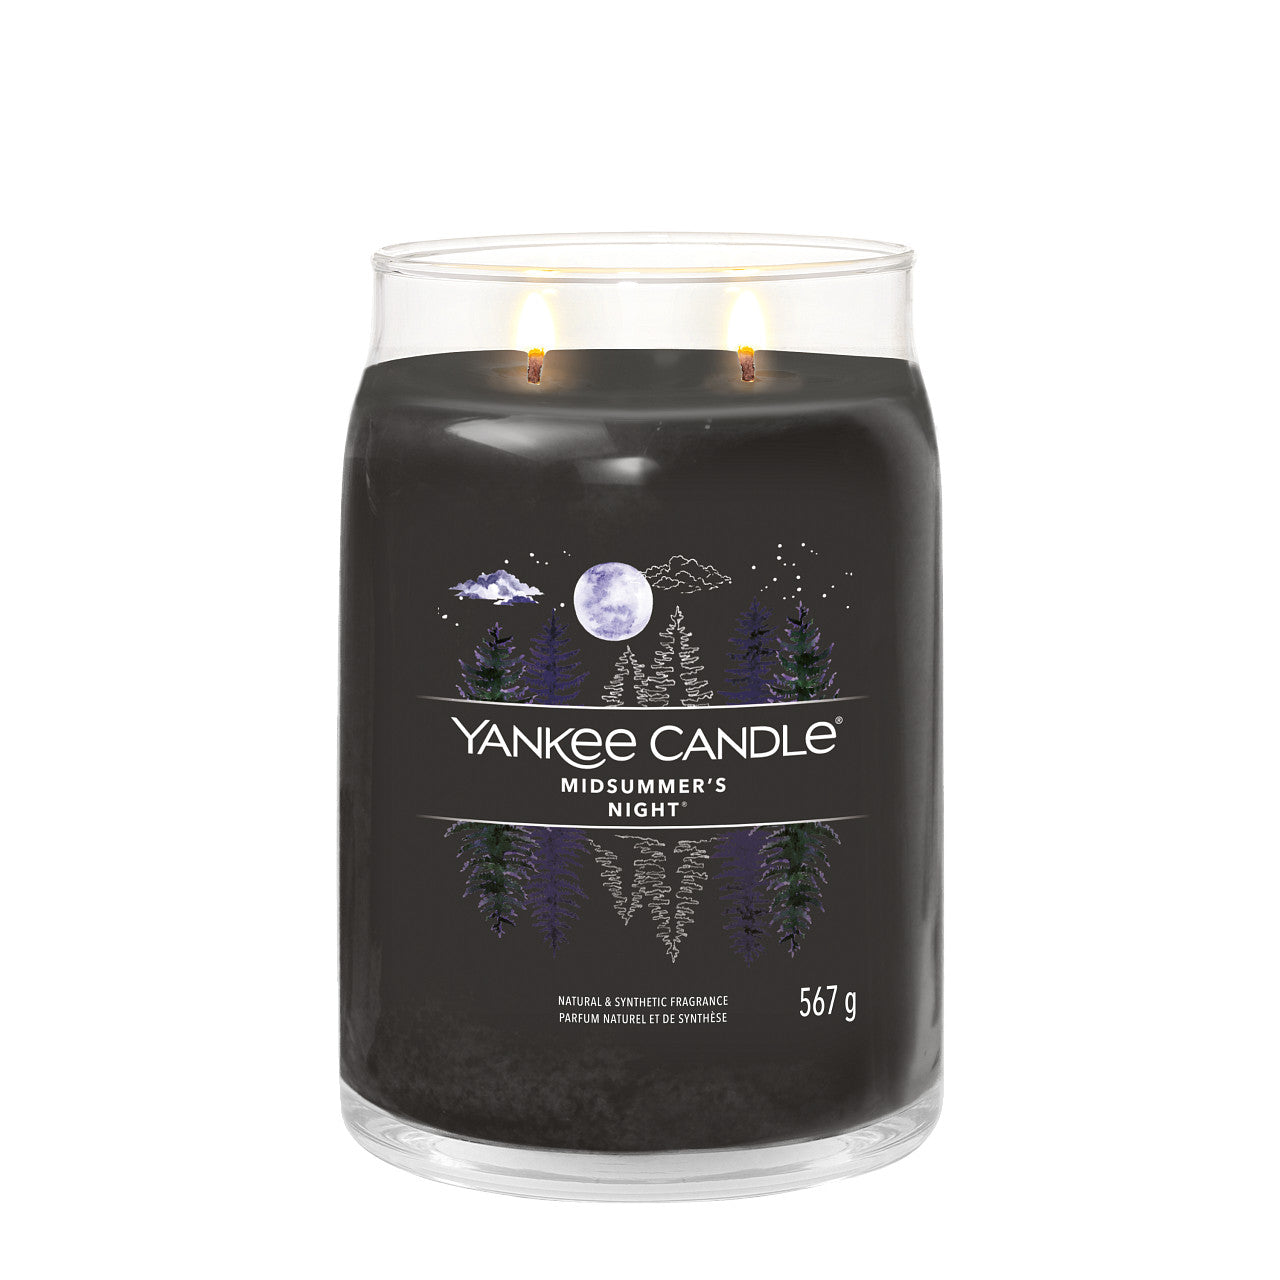 Midsummer's Night - Signature Large Jar Scented Candle